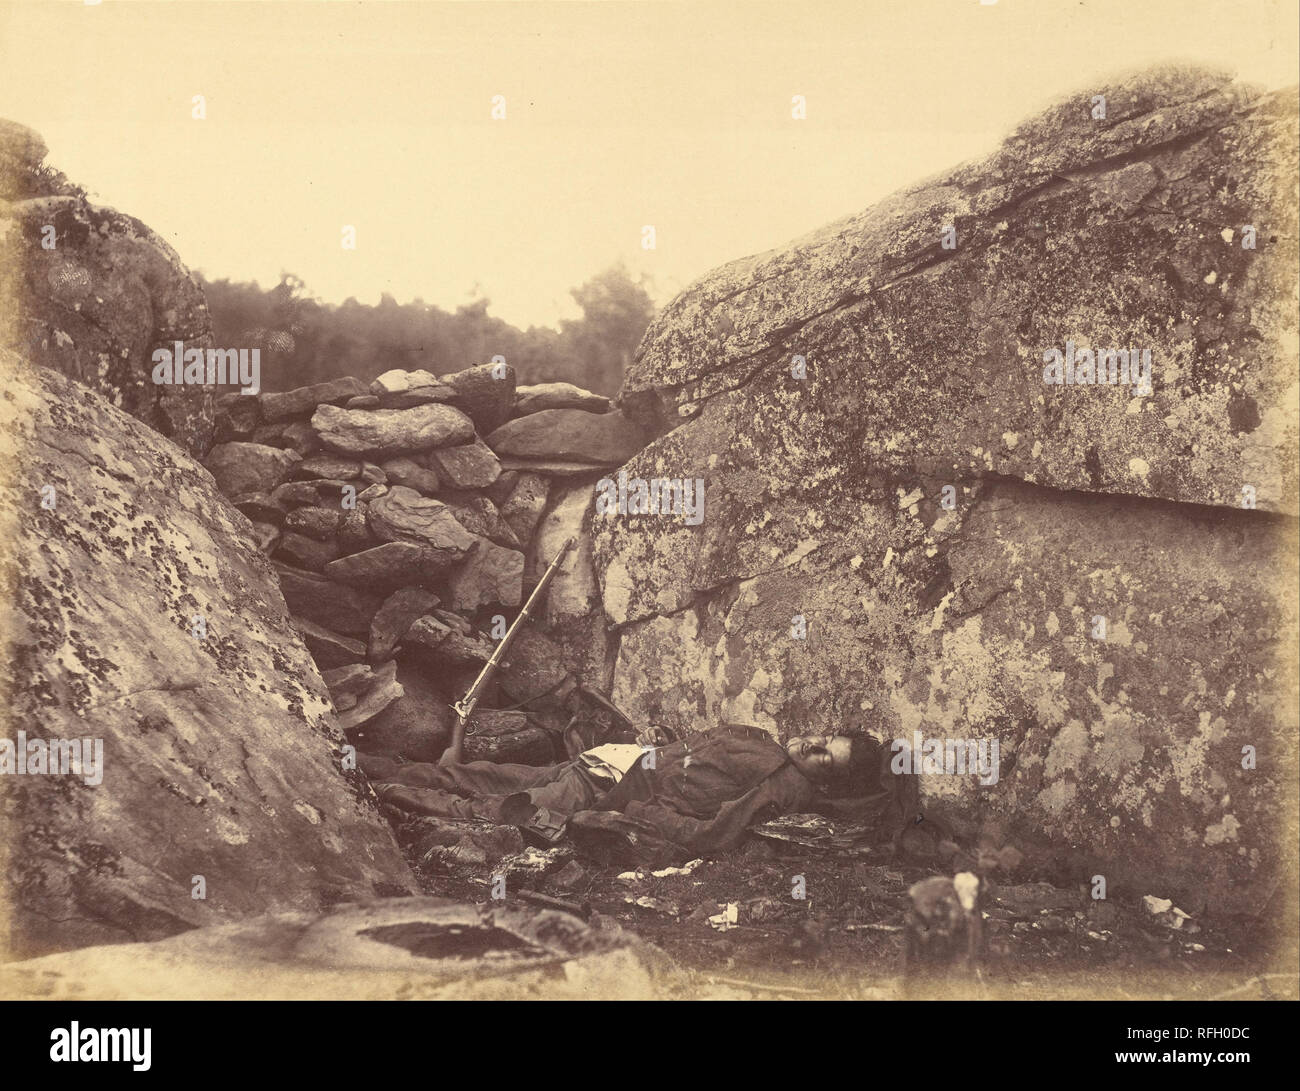 Home of a Rebel Sharpshooter, Gettysburg. Date/Period: Negative July 1863; print 1866. Print. Albumen silver. Height: 176 mm (6.92 in); Width: 230 mm (9.05 in). Author: Alexander Gardner. Stock Photo